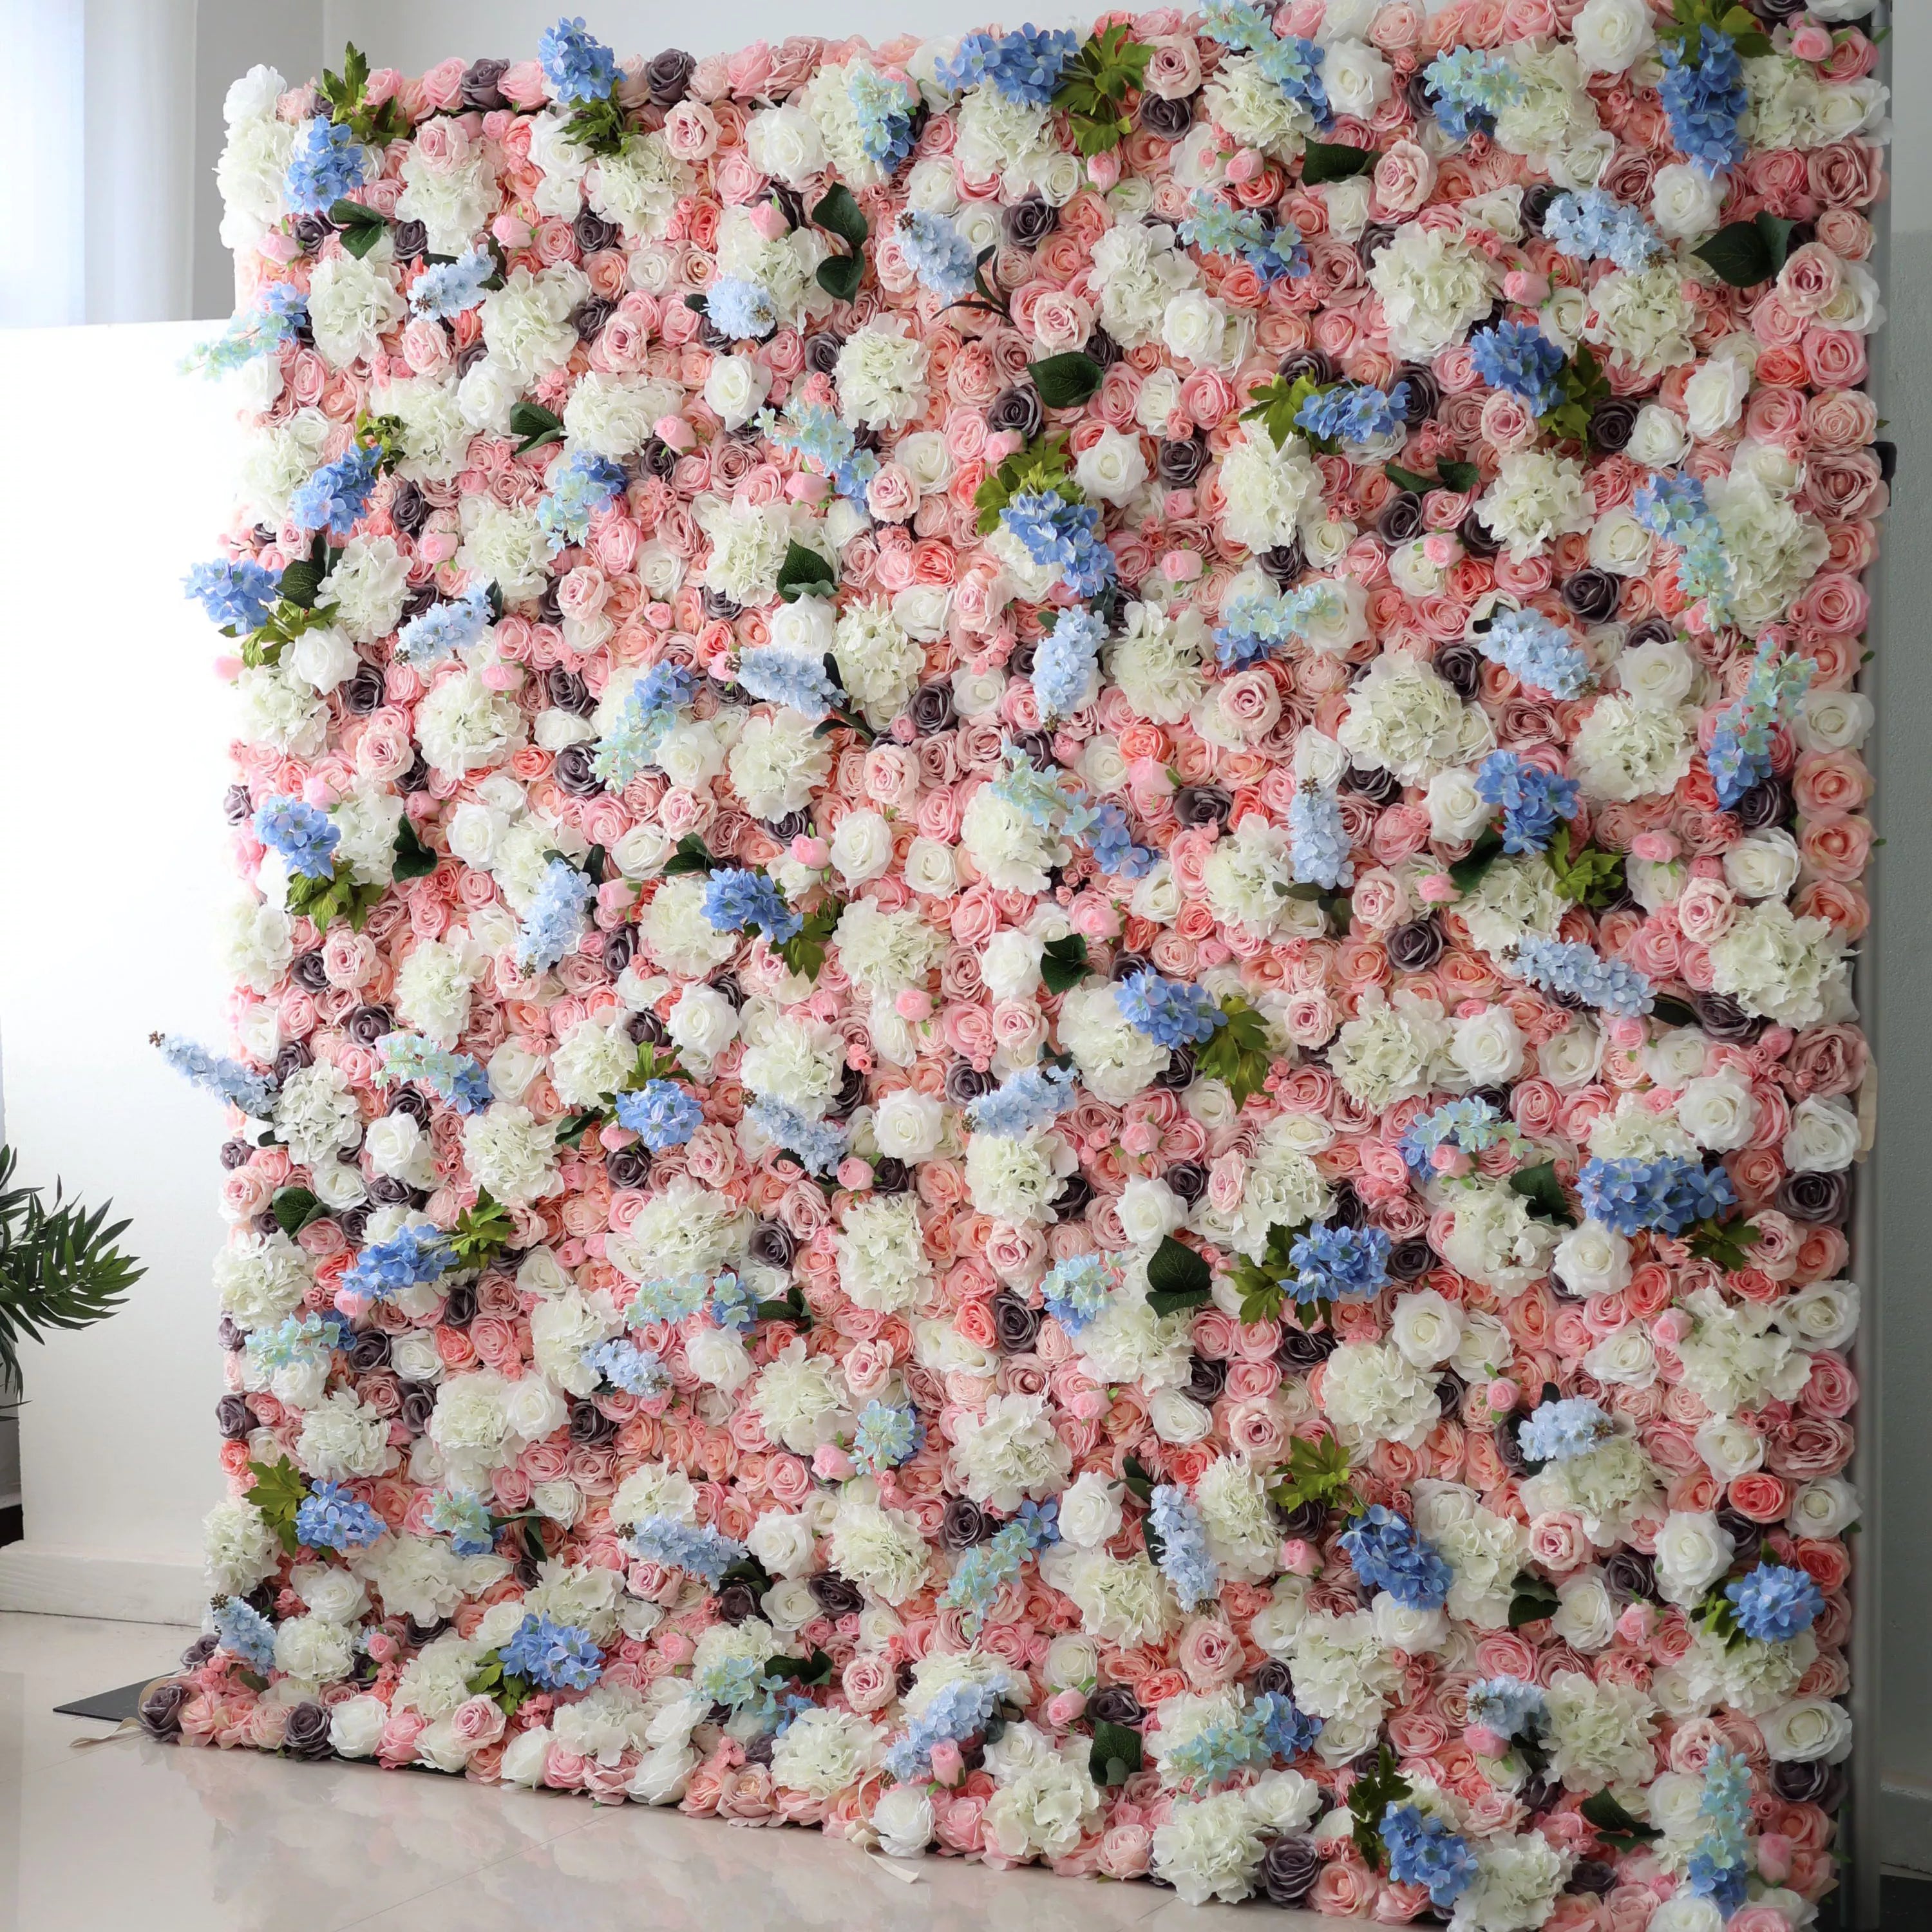 Valar Flowers roll up fabric artificial flower wall for wedding backdrop, floral party decor, and event photography, model VF-1280